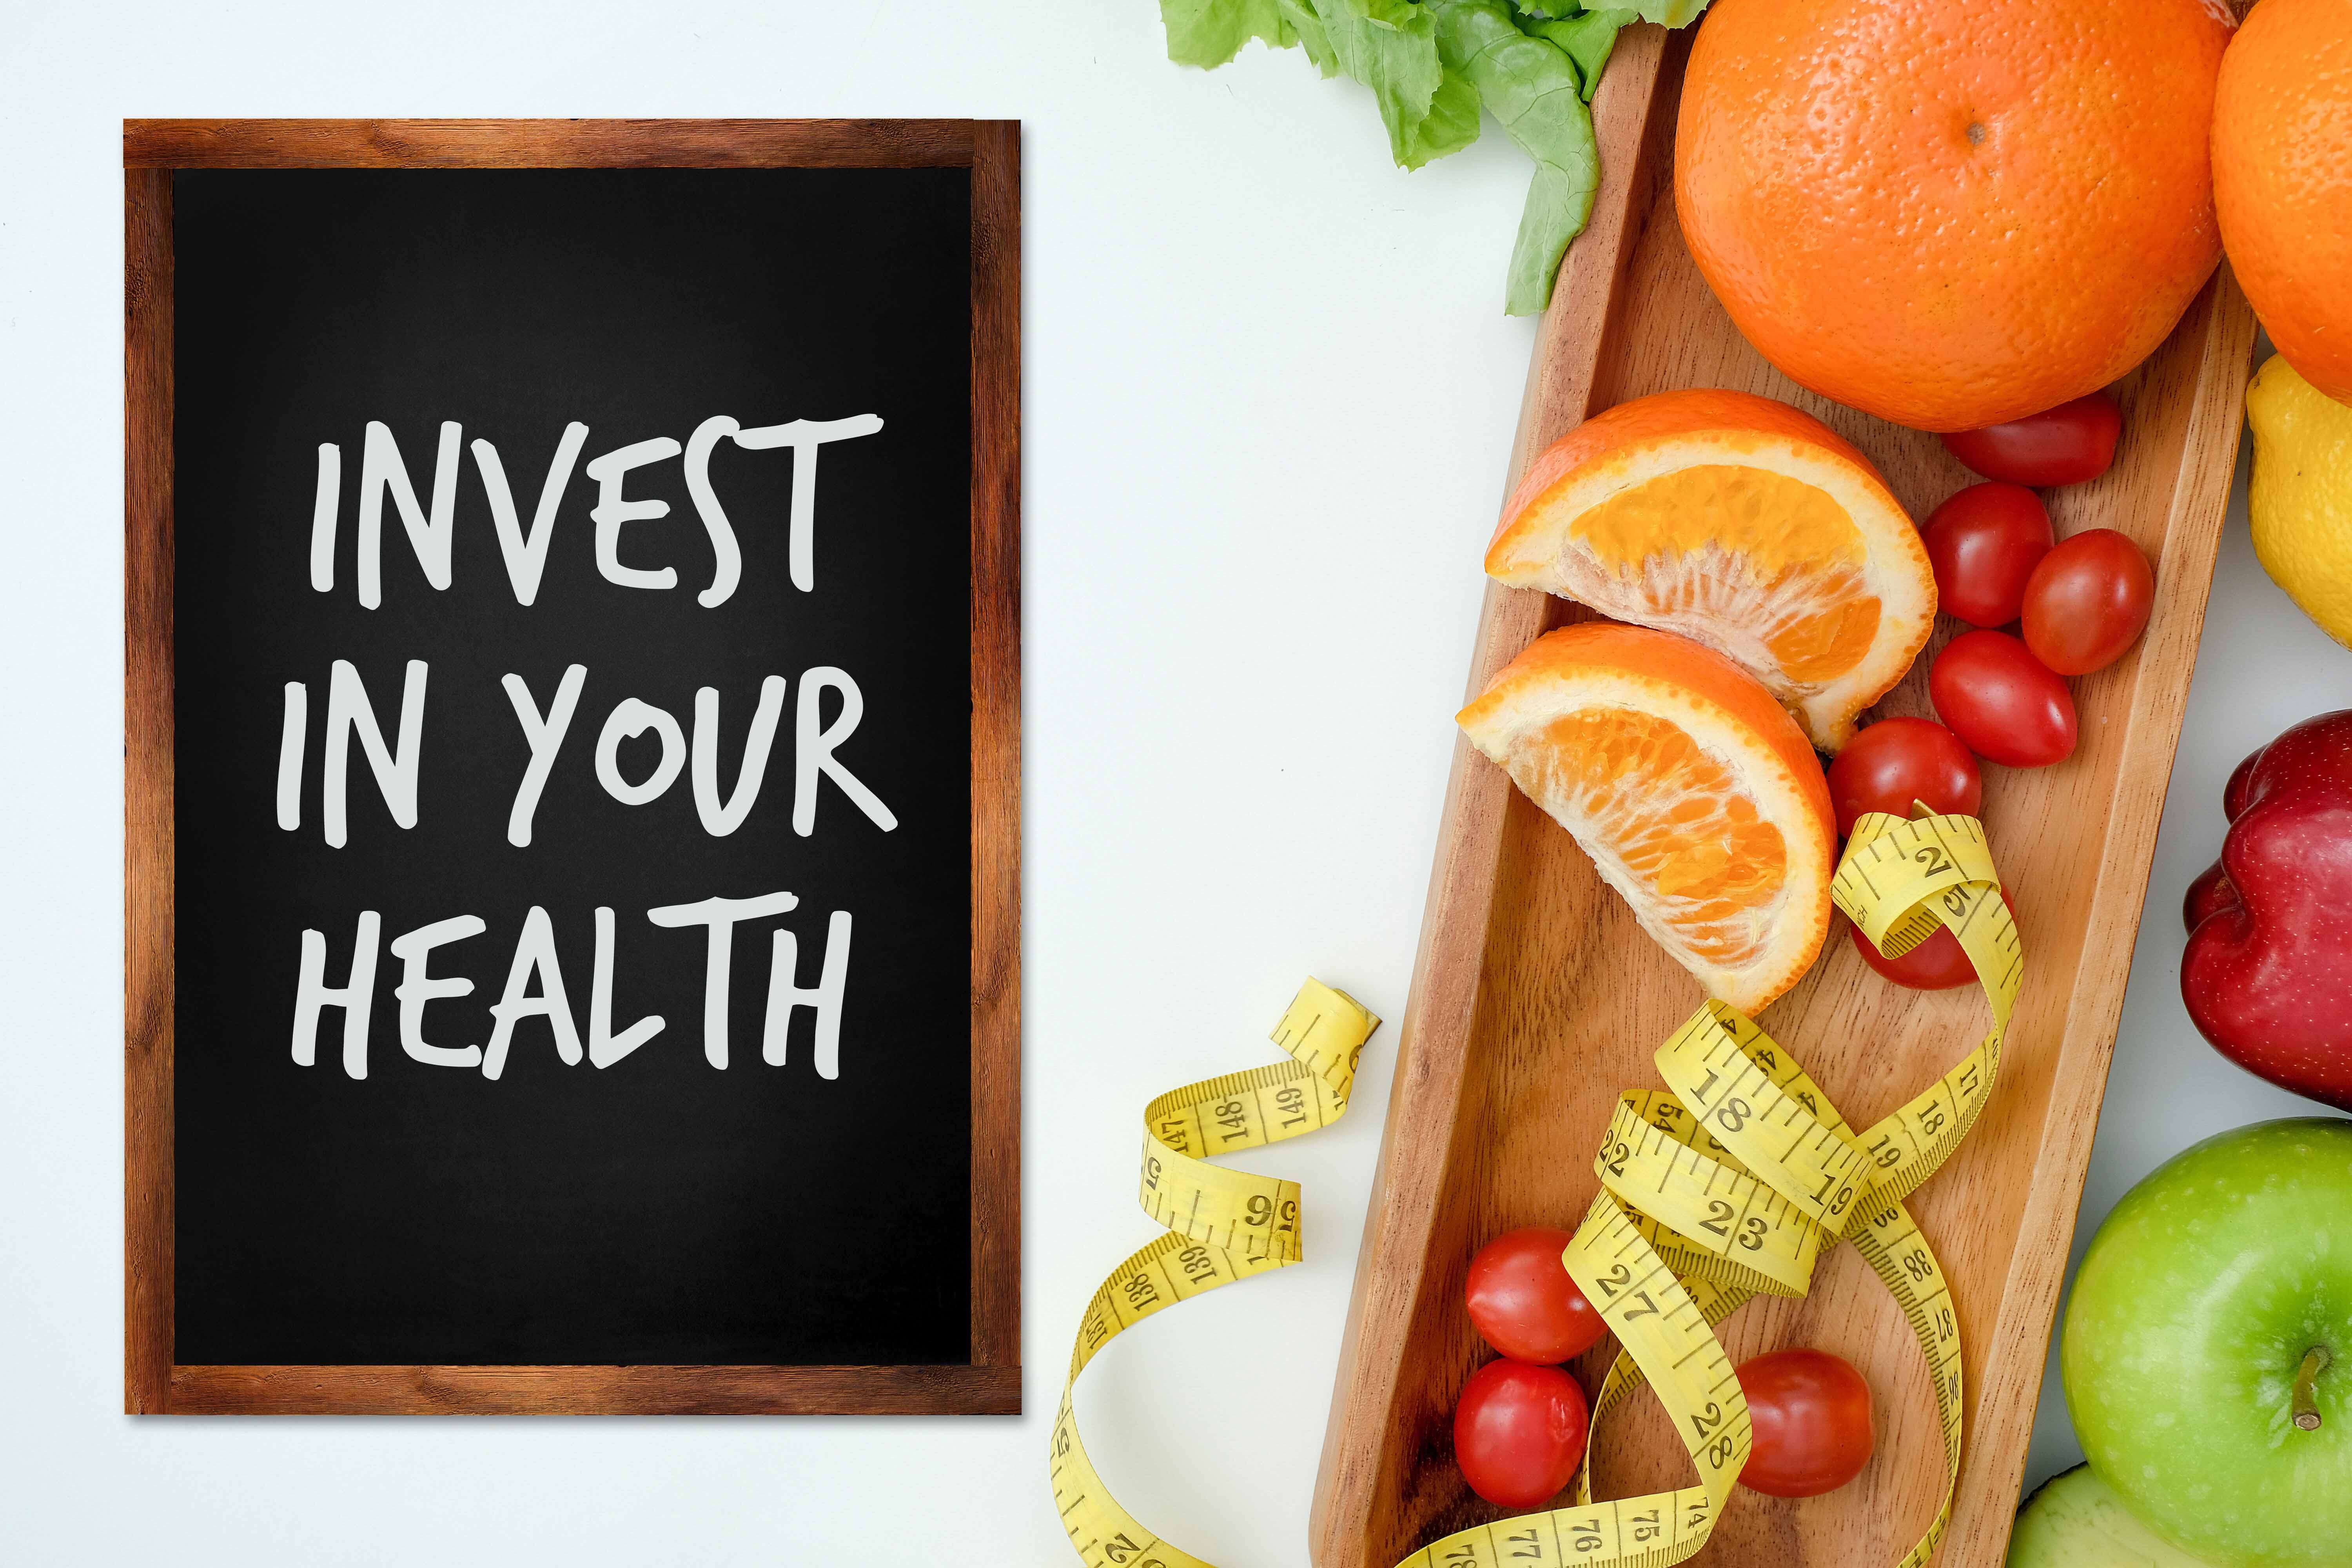 Invest in your health with fruit and vegetables